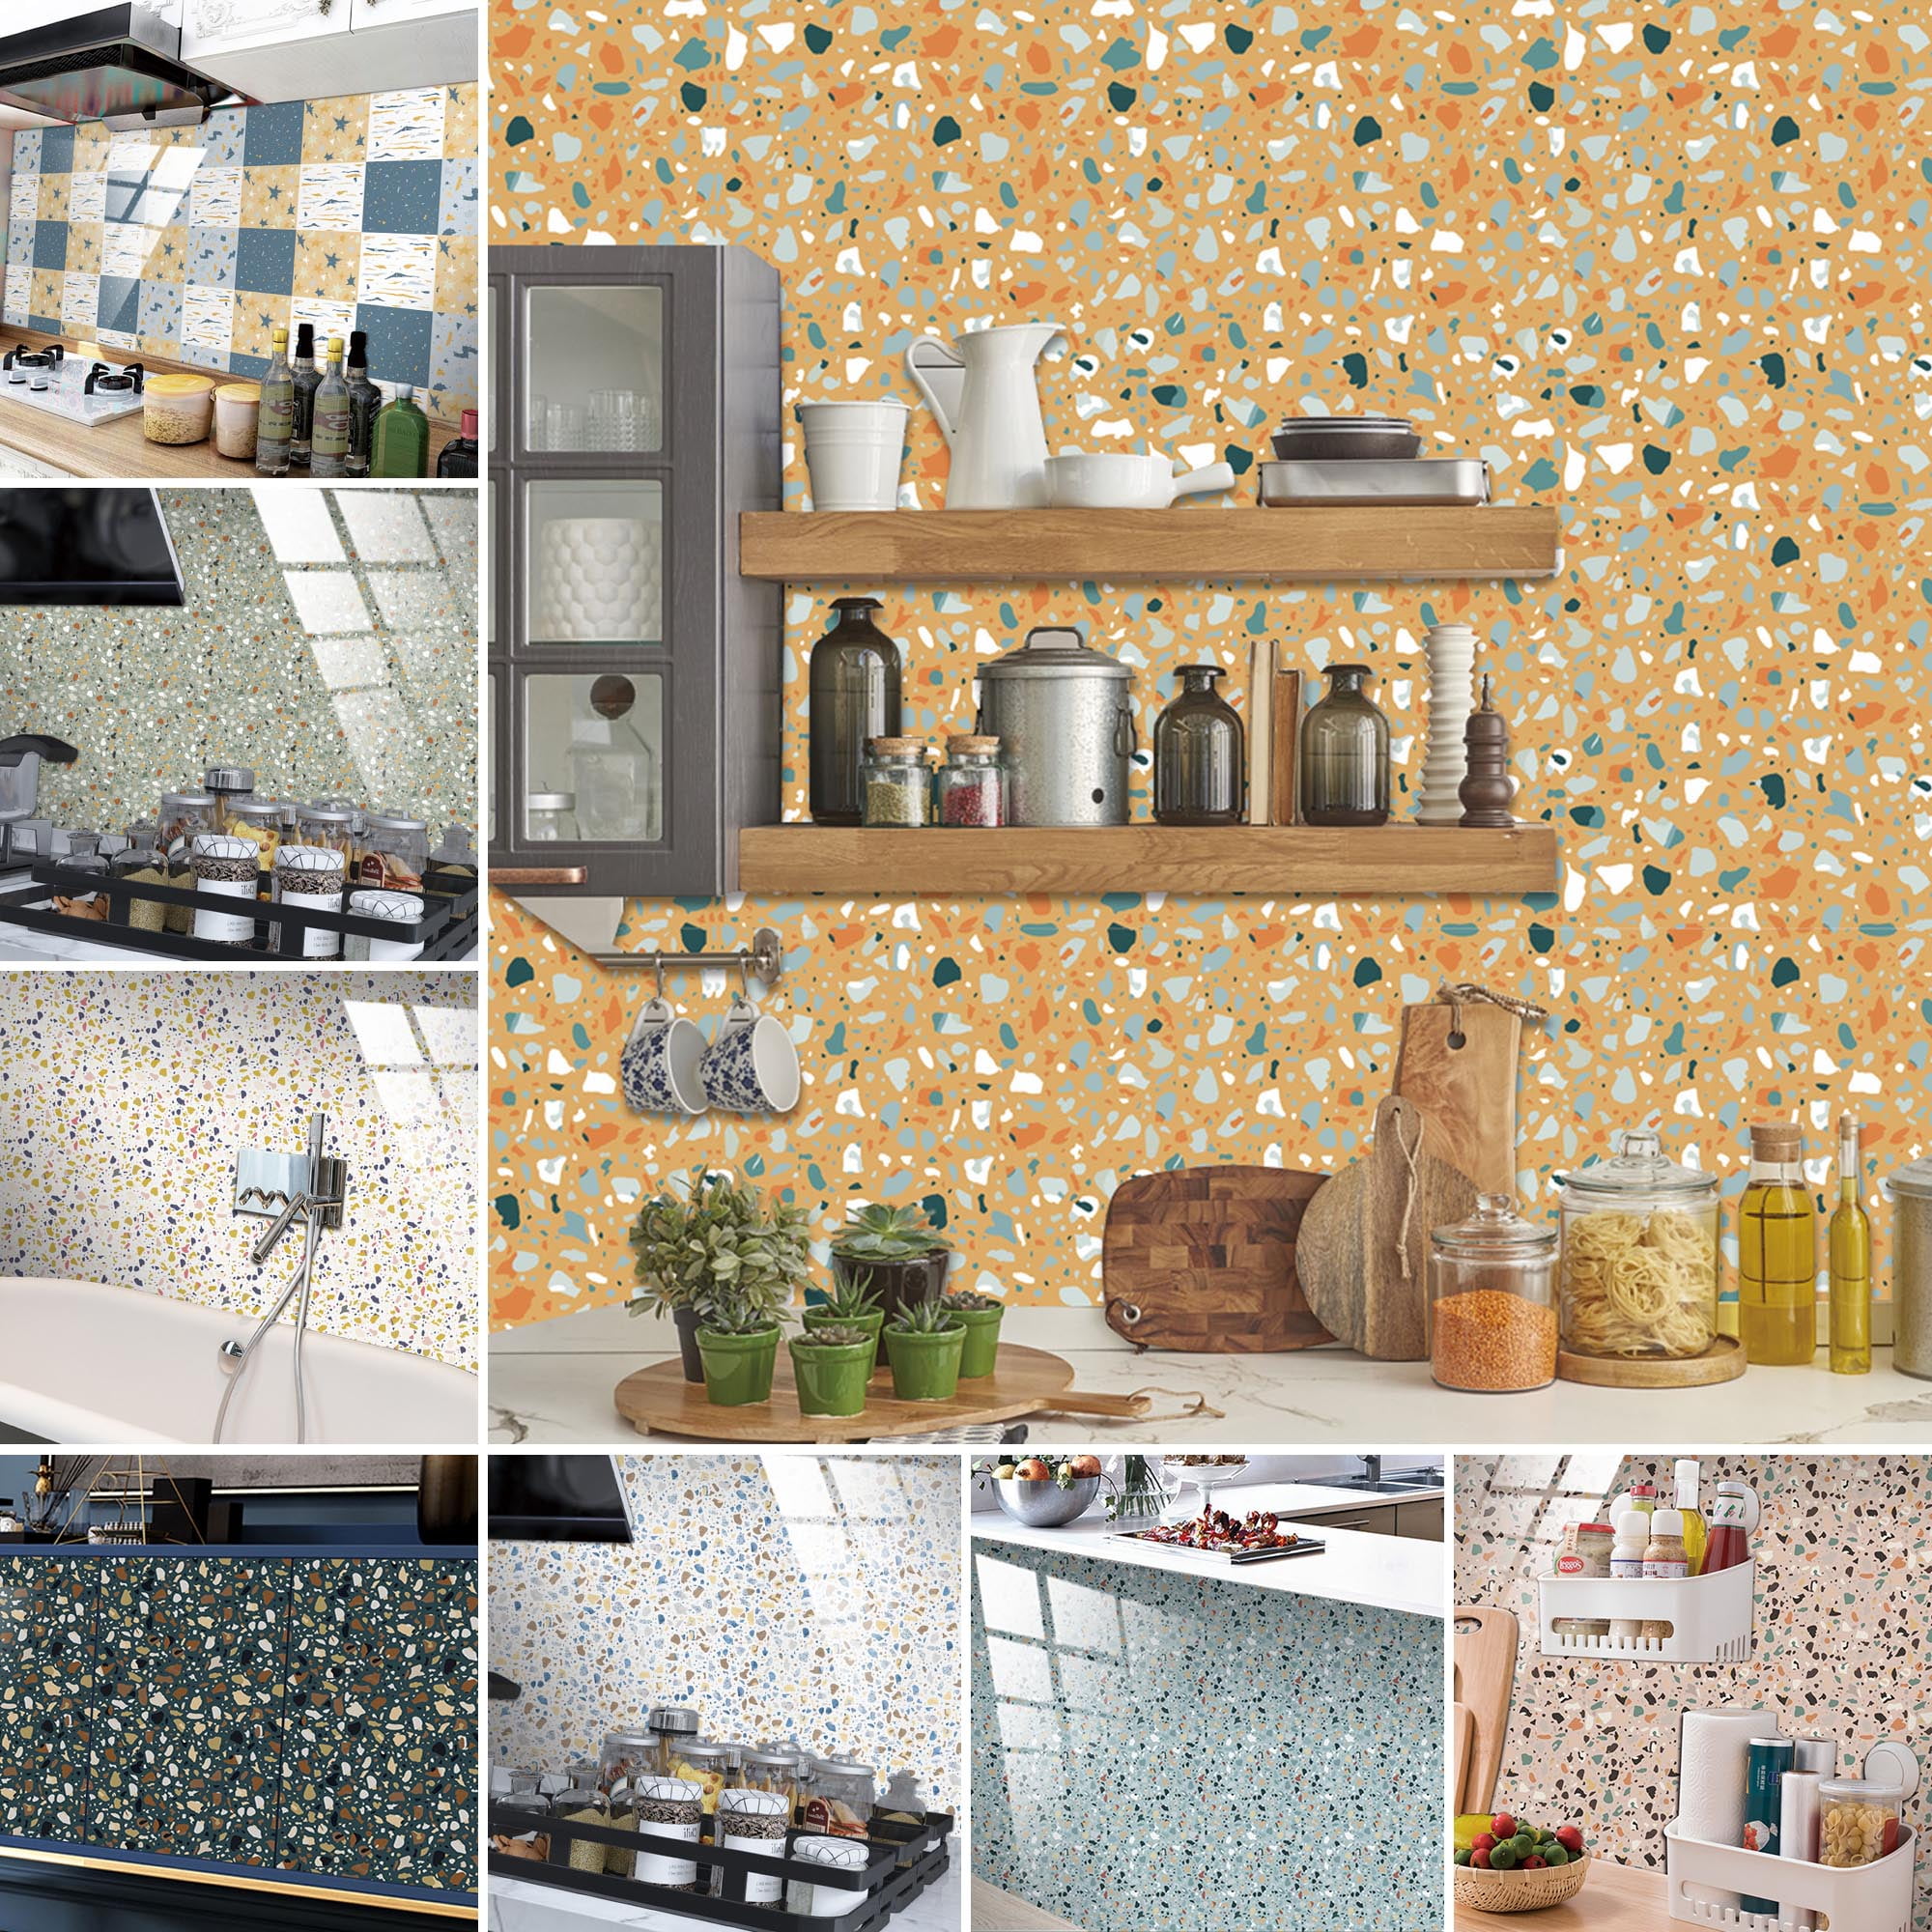 3D Kitchen Tile Stickers Bathroom Mosaic Sticker Self-adhesive Wall Decor Home 